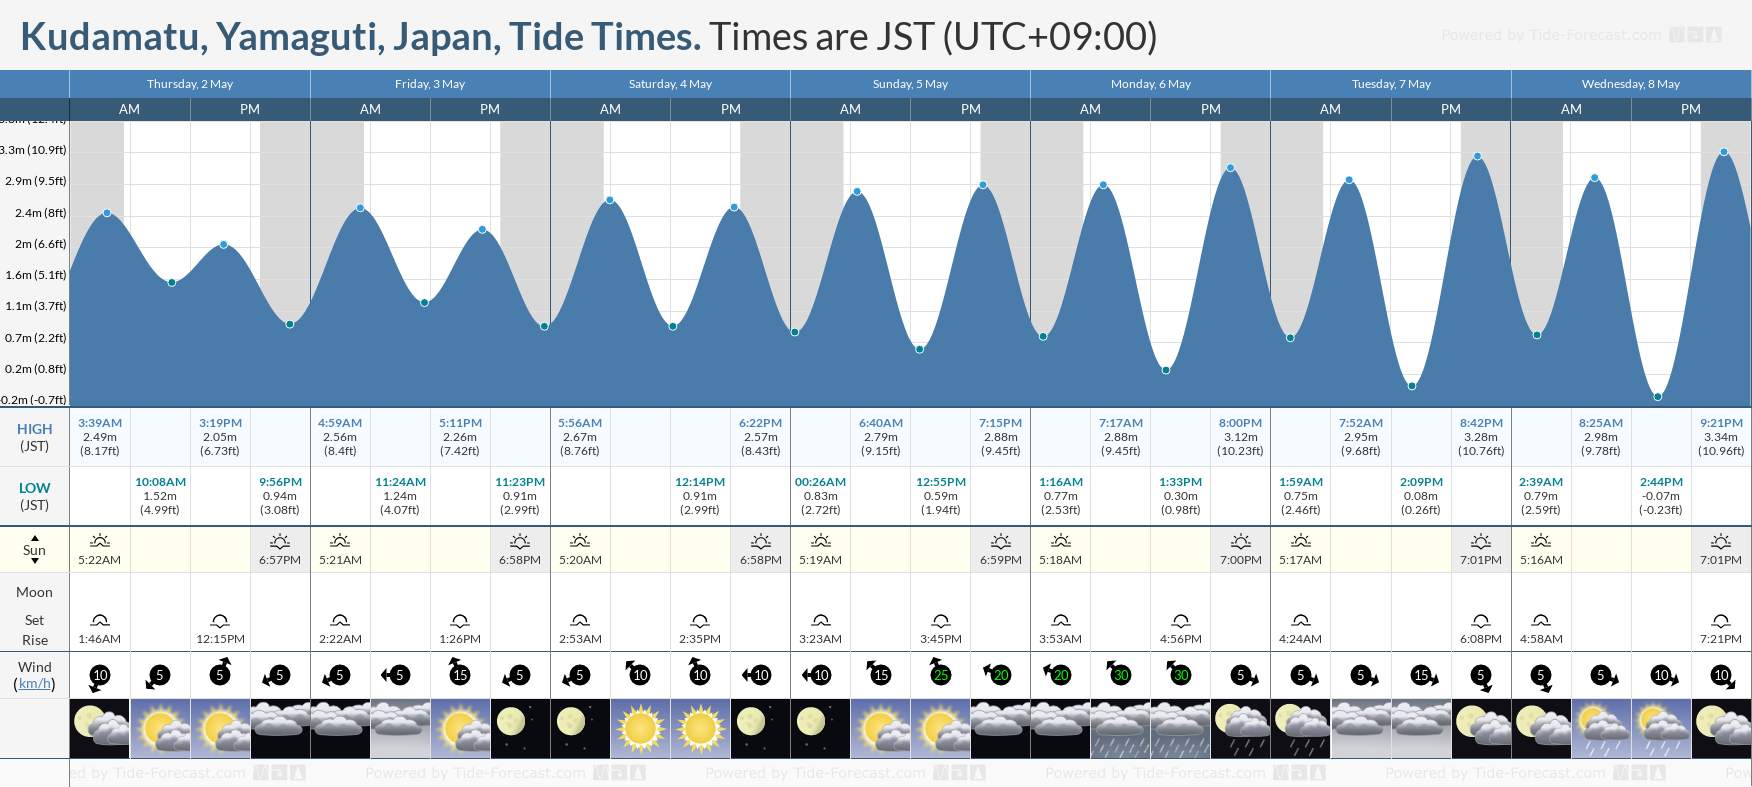 Kudamatu, Yamaguti, Japan Tide Chart including high and low tide tide times for the next 7 days